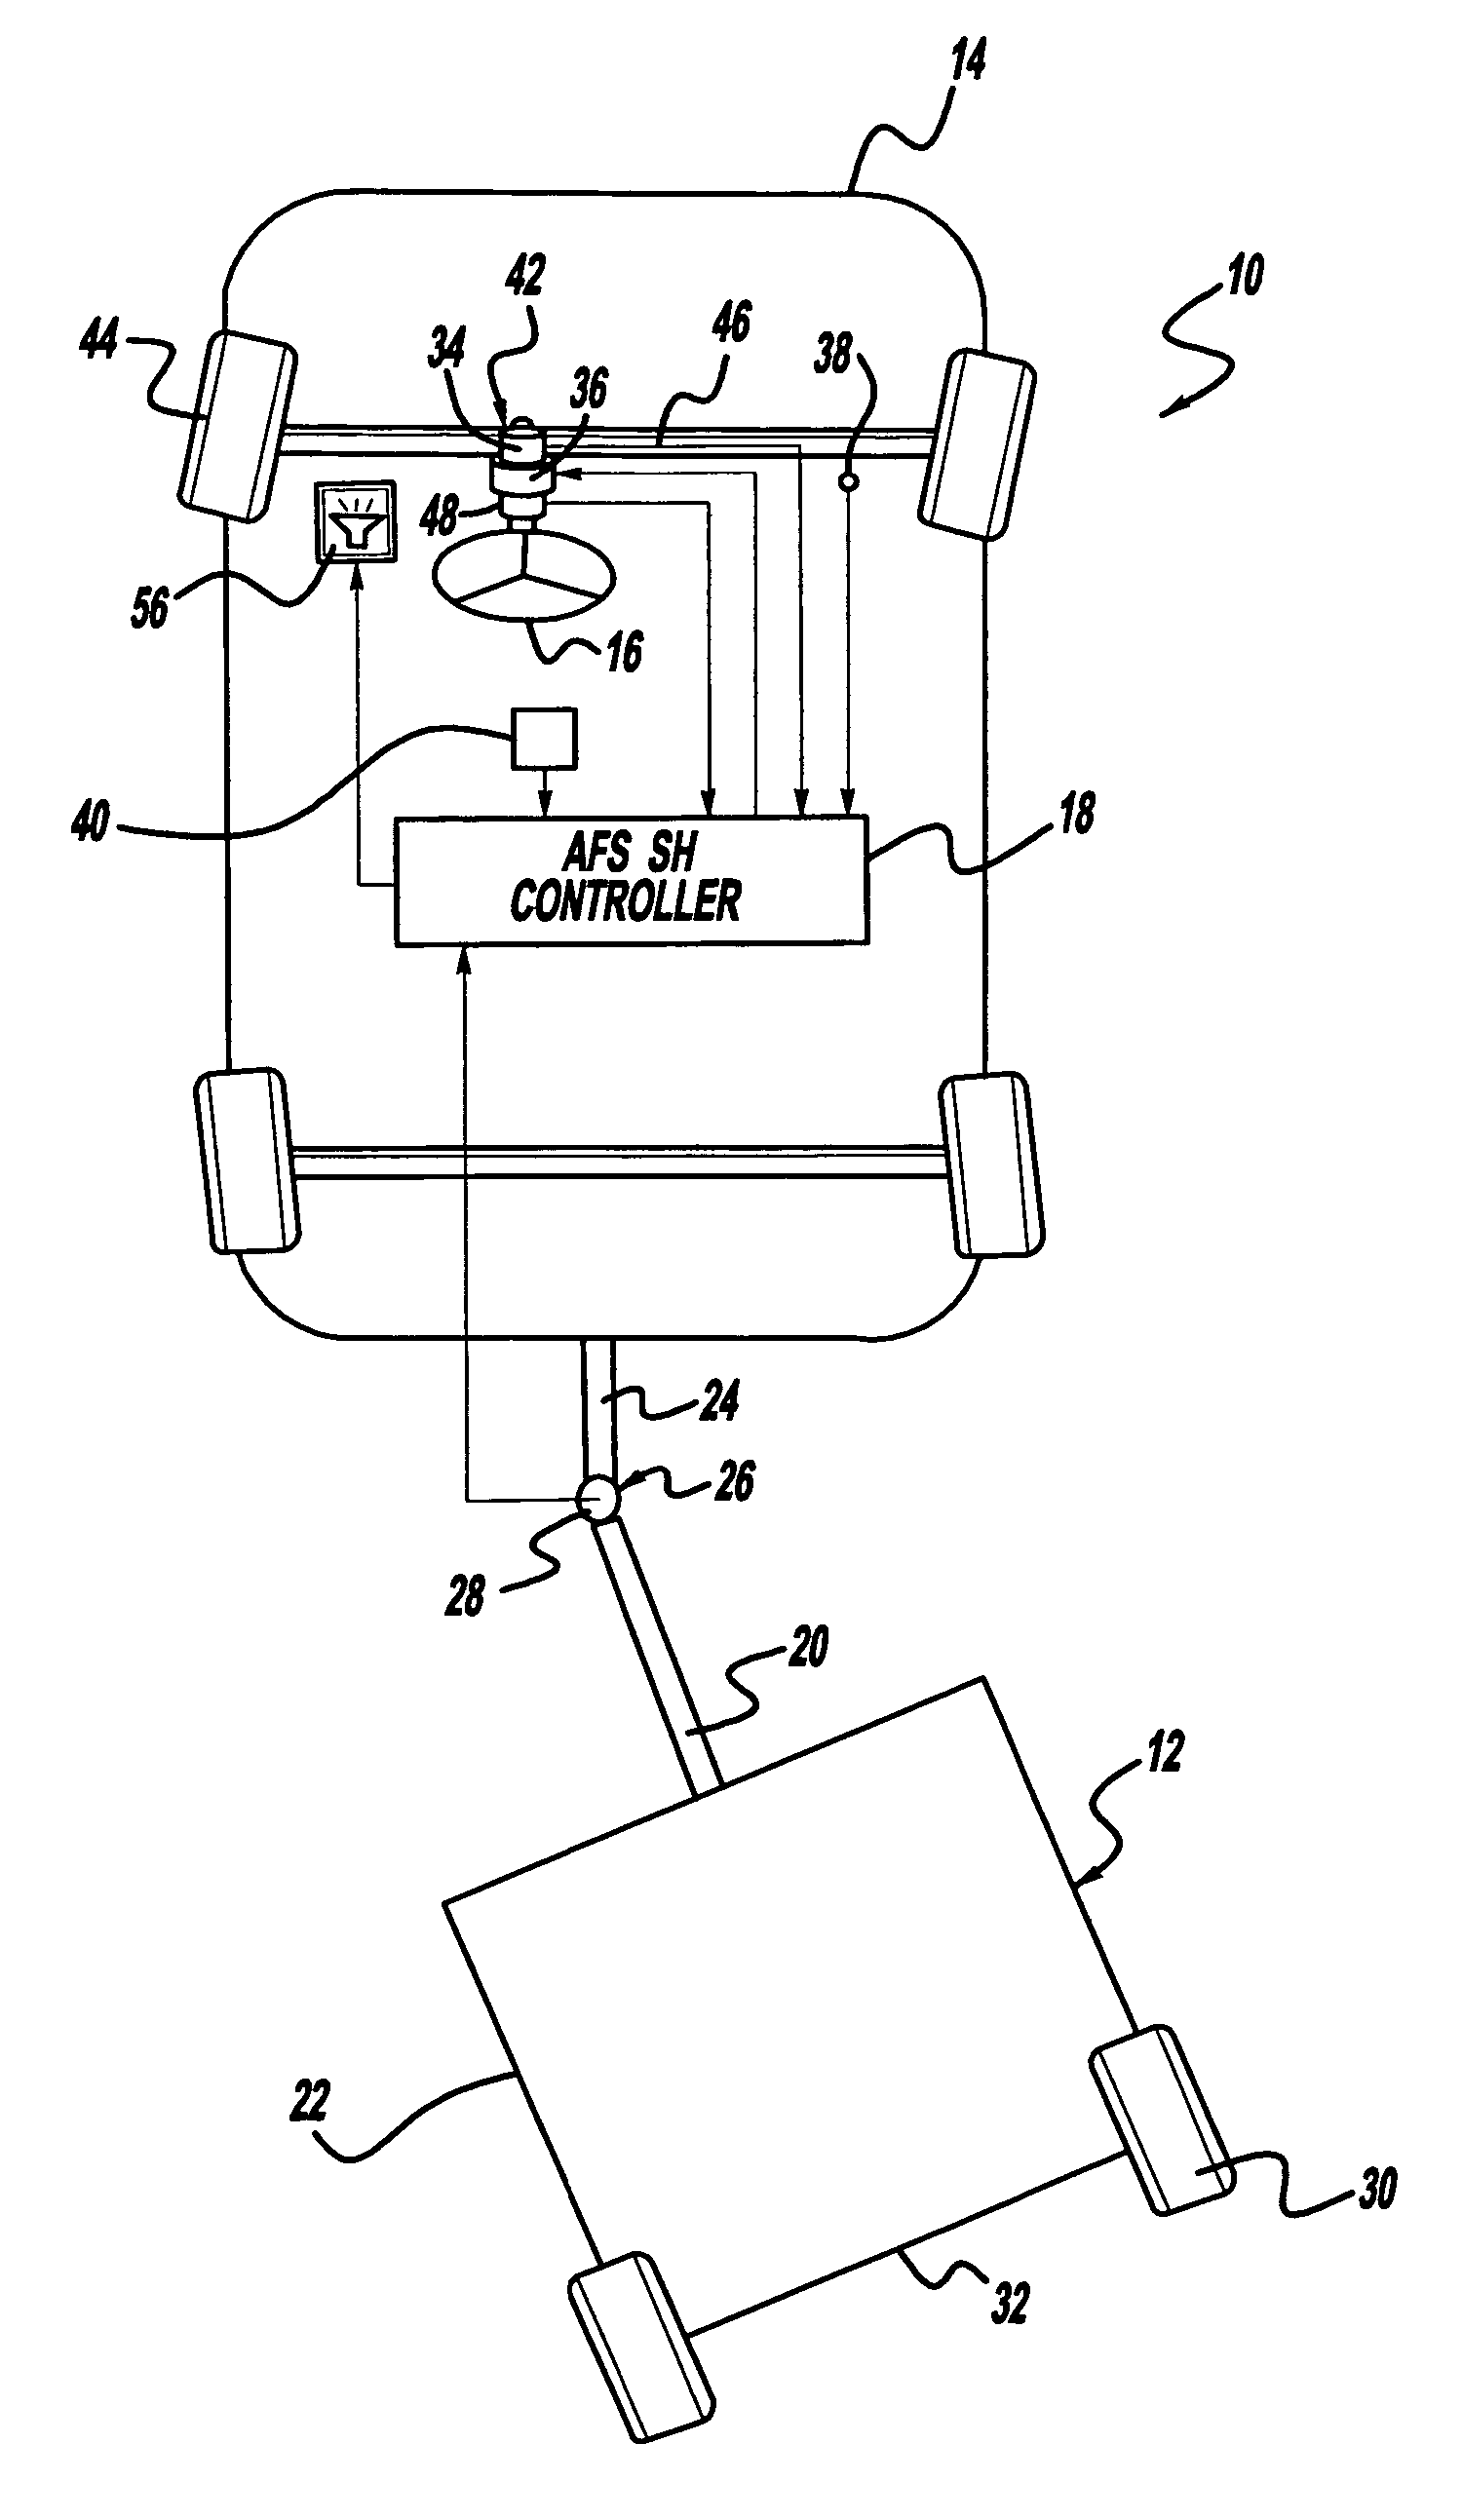 Vehicle-trailer backing up system using active front steer